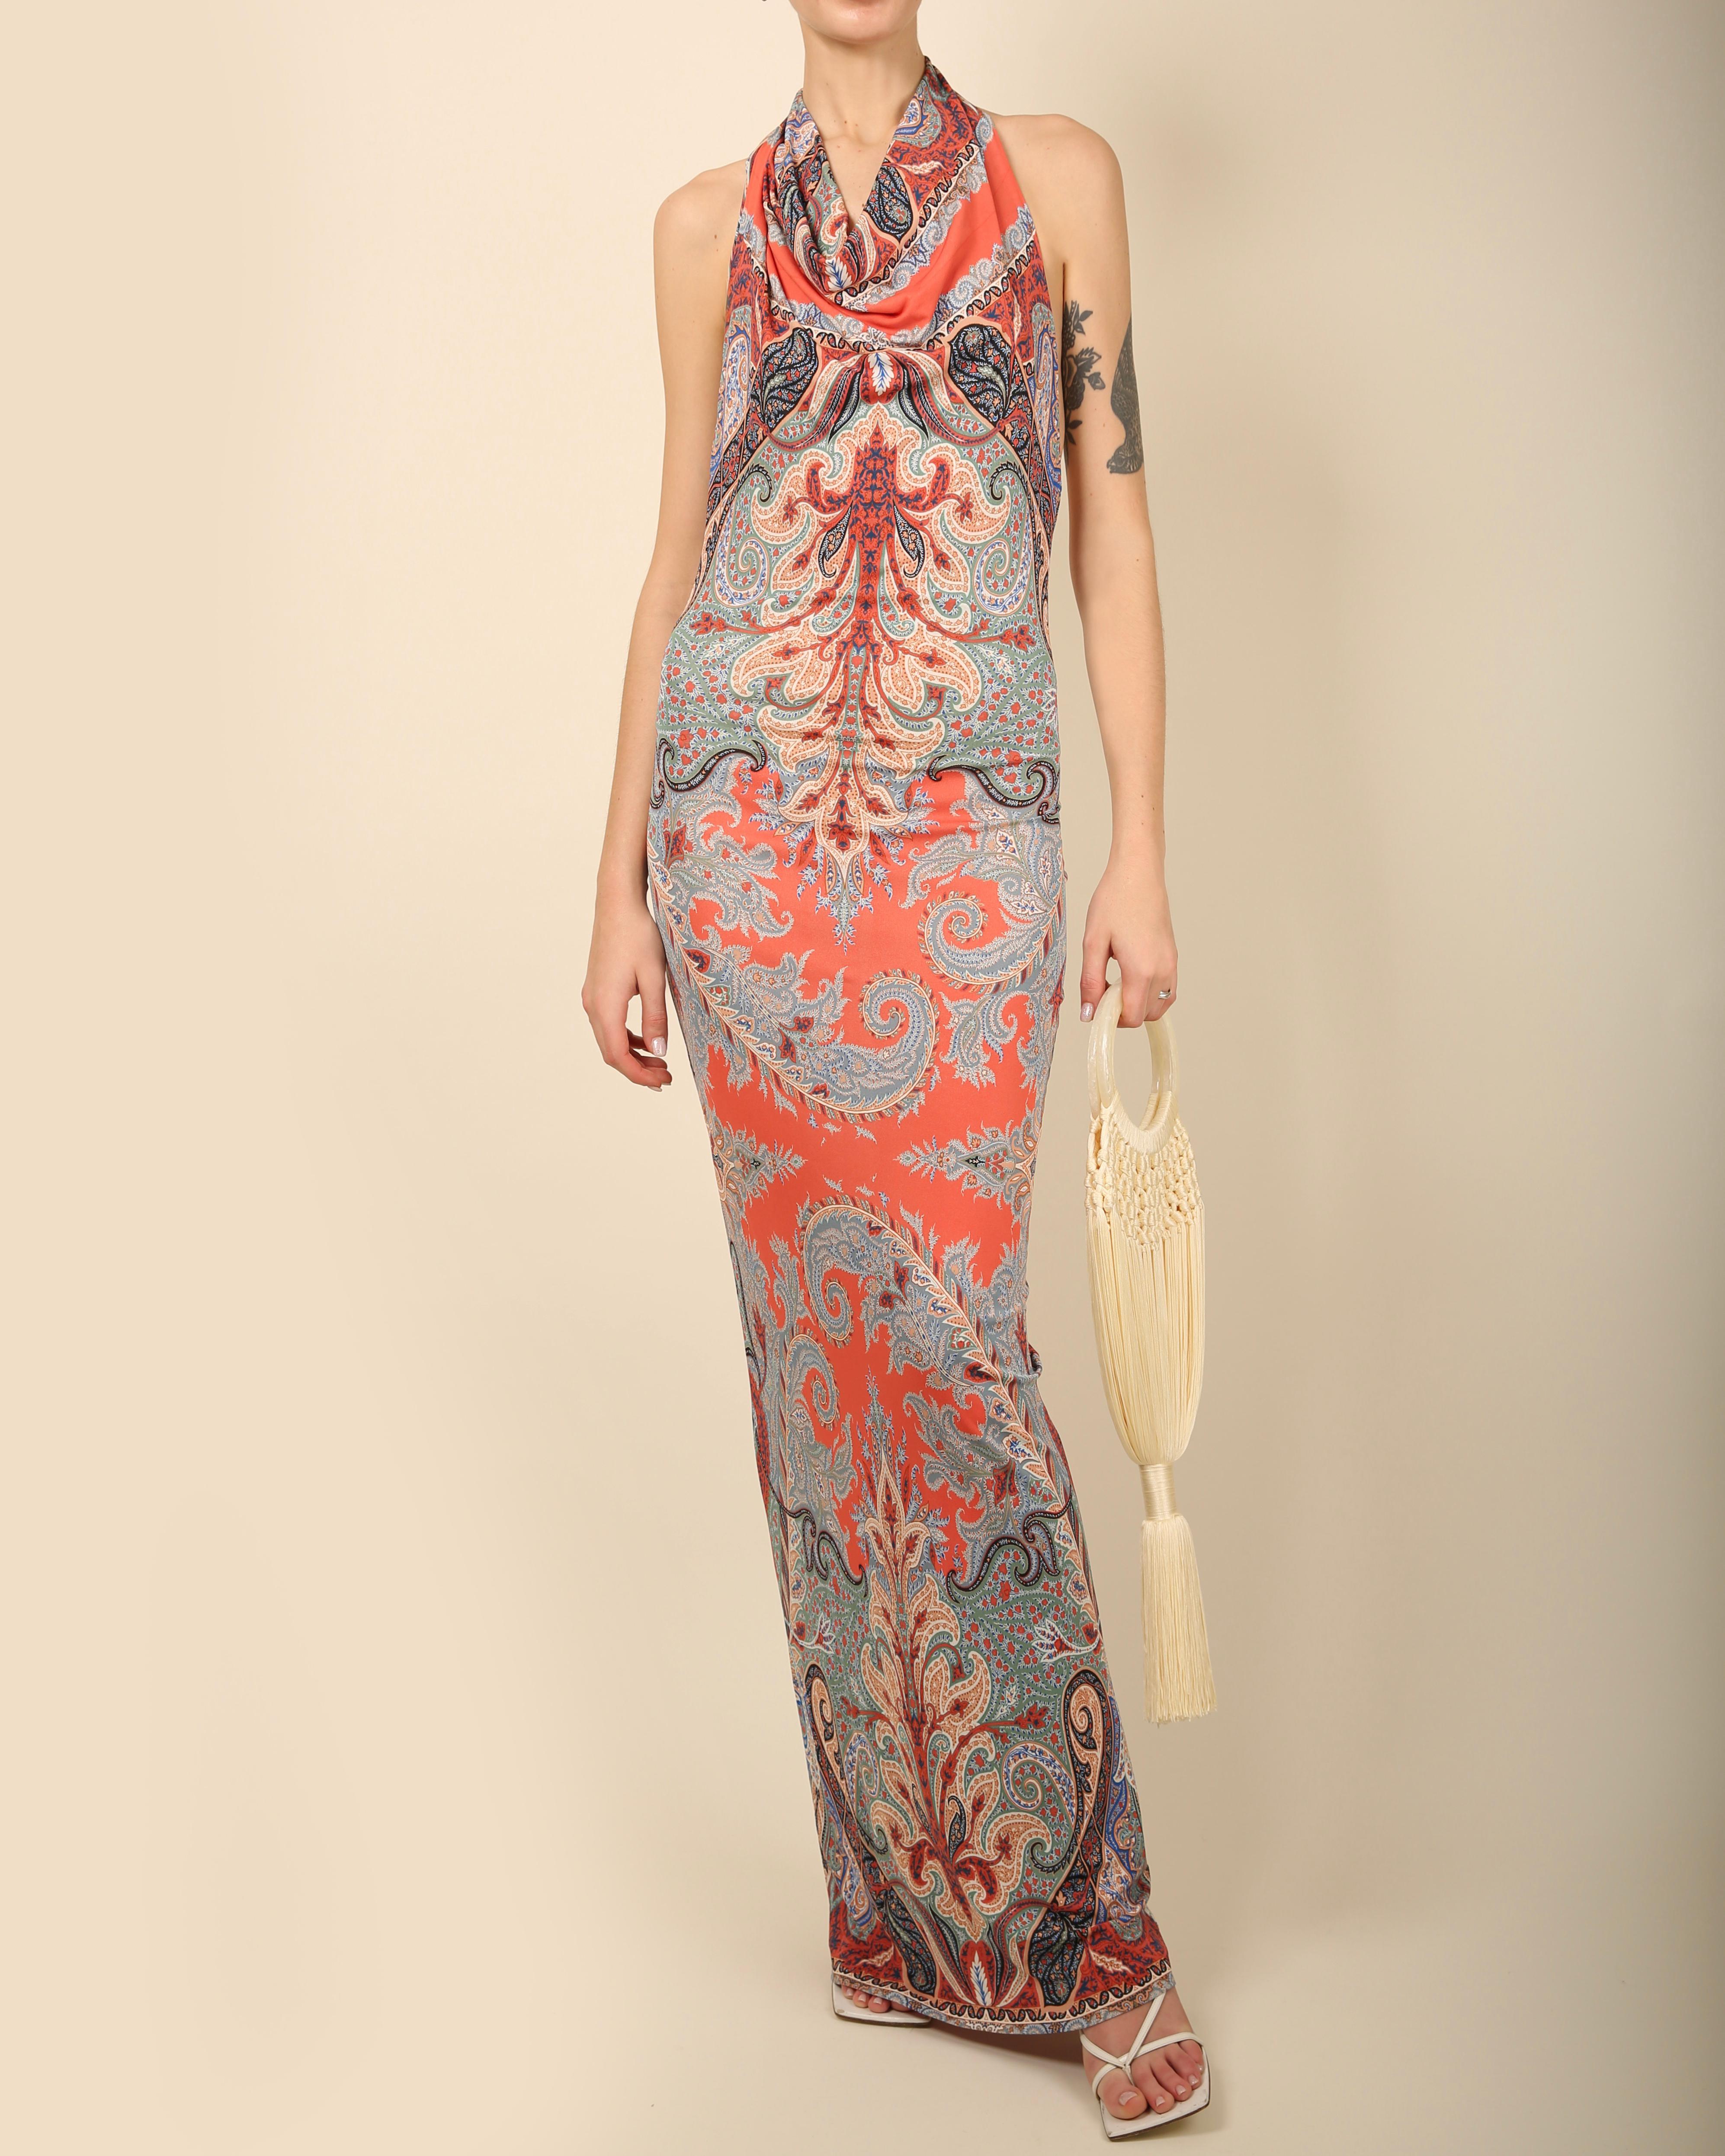 Etro paisley print floor length dress from the S/S 2014 runway collection
Halter neck cut with a draped neckline 
Body con stretch fit
Backless
Colours consist of red, blue, green, black and white

Size:
IT 40 with plenty of